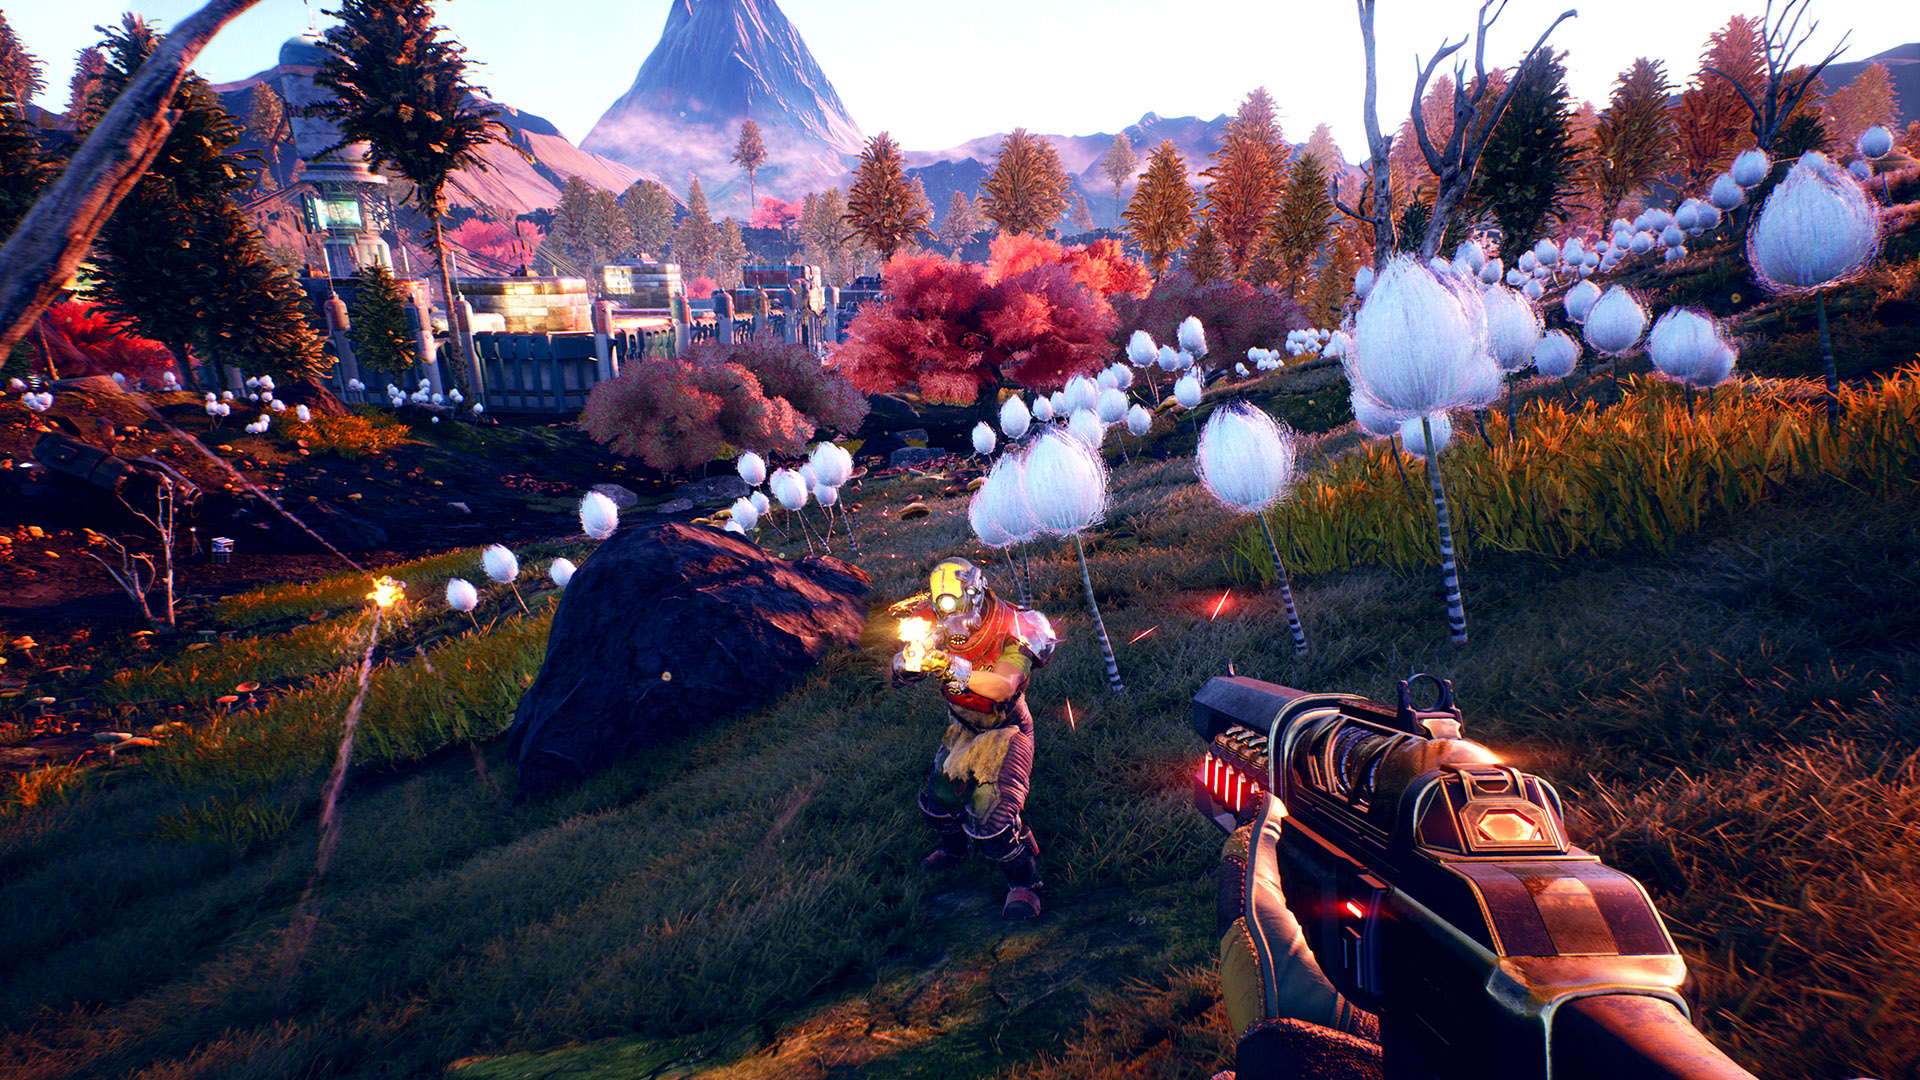 The Outer Worlds Review: Tales from the Outer Rim - The AU Review